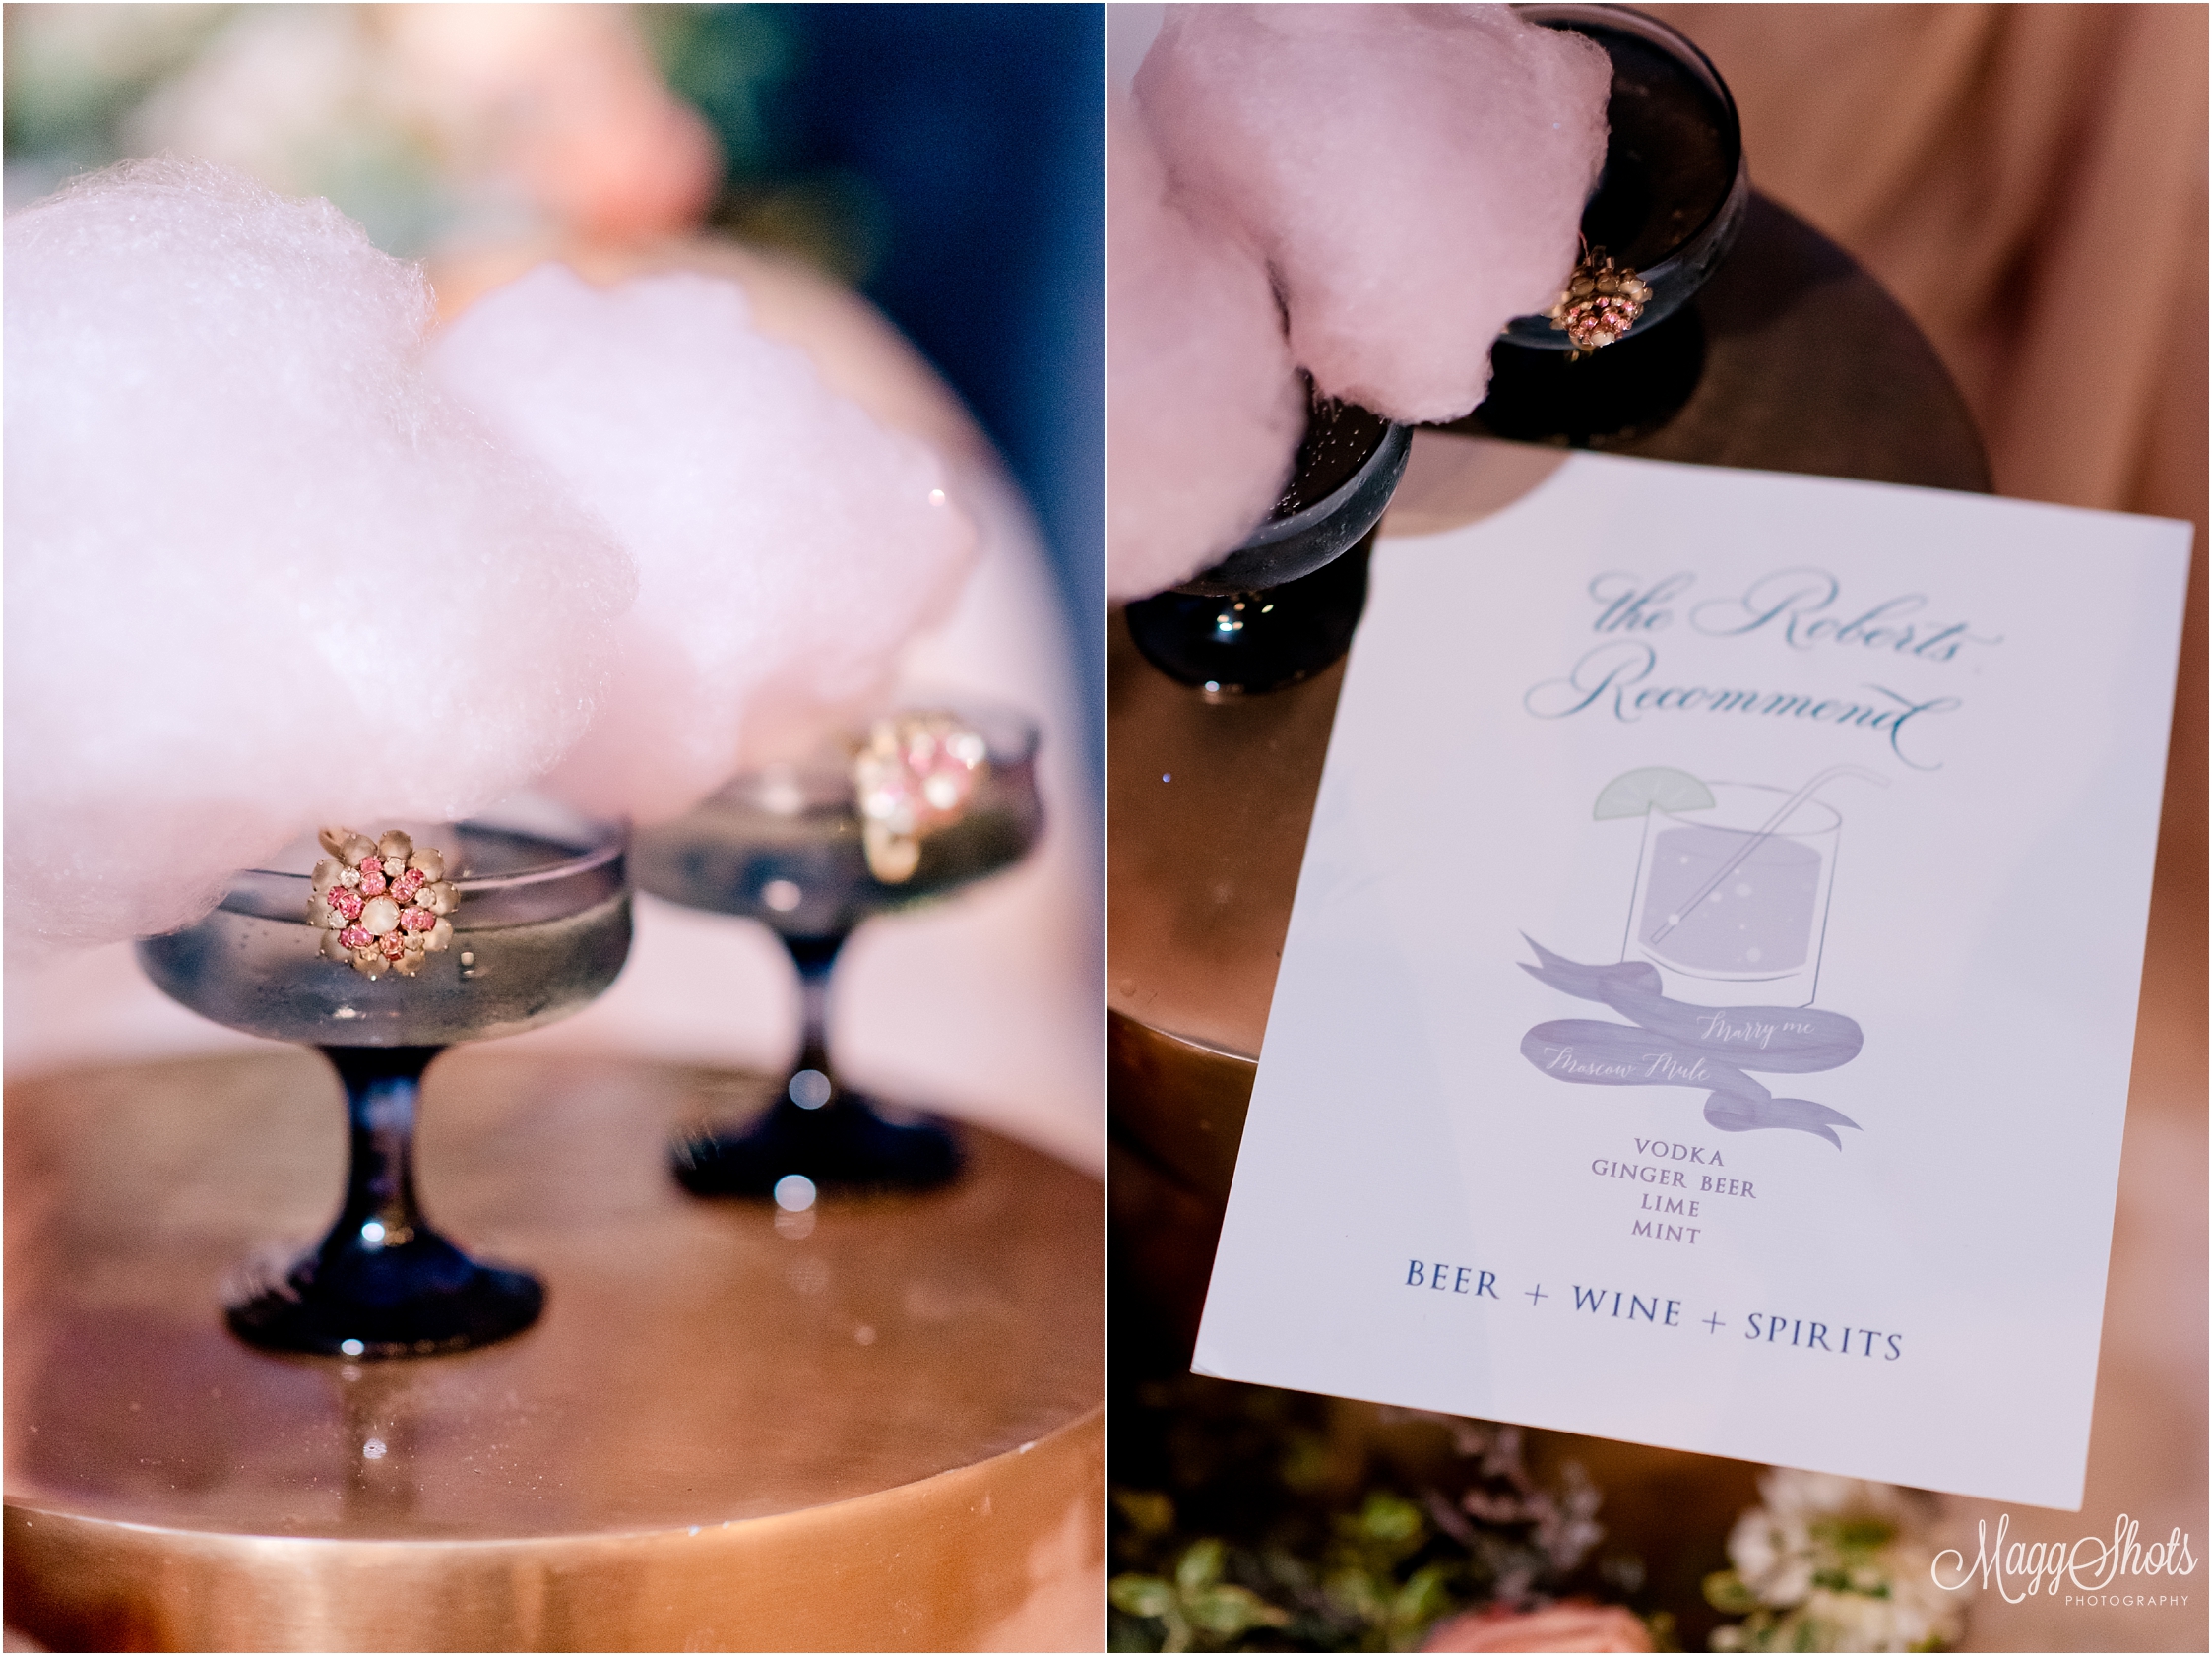 Styled Shoot, Wedding, Love, MaggShots Photography, MaggShots, Professional Photography, Professional Photographer, Couple, Bouquet, Flowers, Ring, The Washer Sculpture Center, Dallas, Drinks, Cotton Candy, Pink, Fluffy